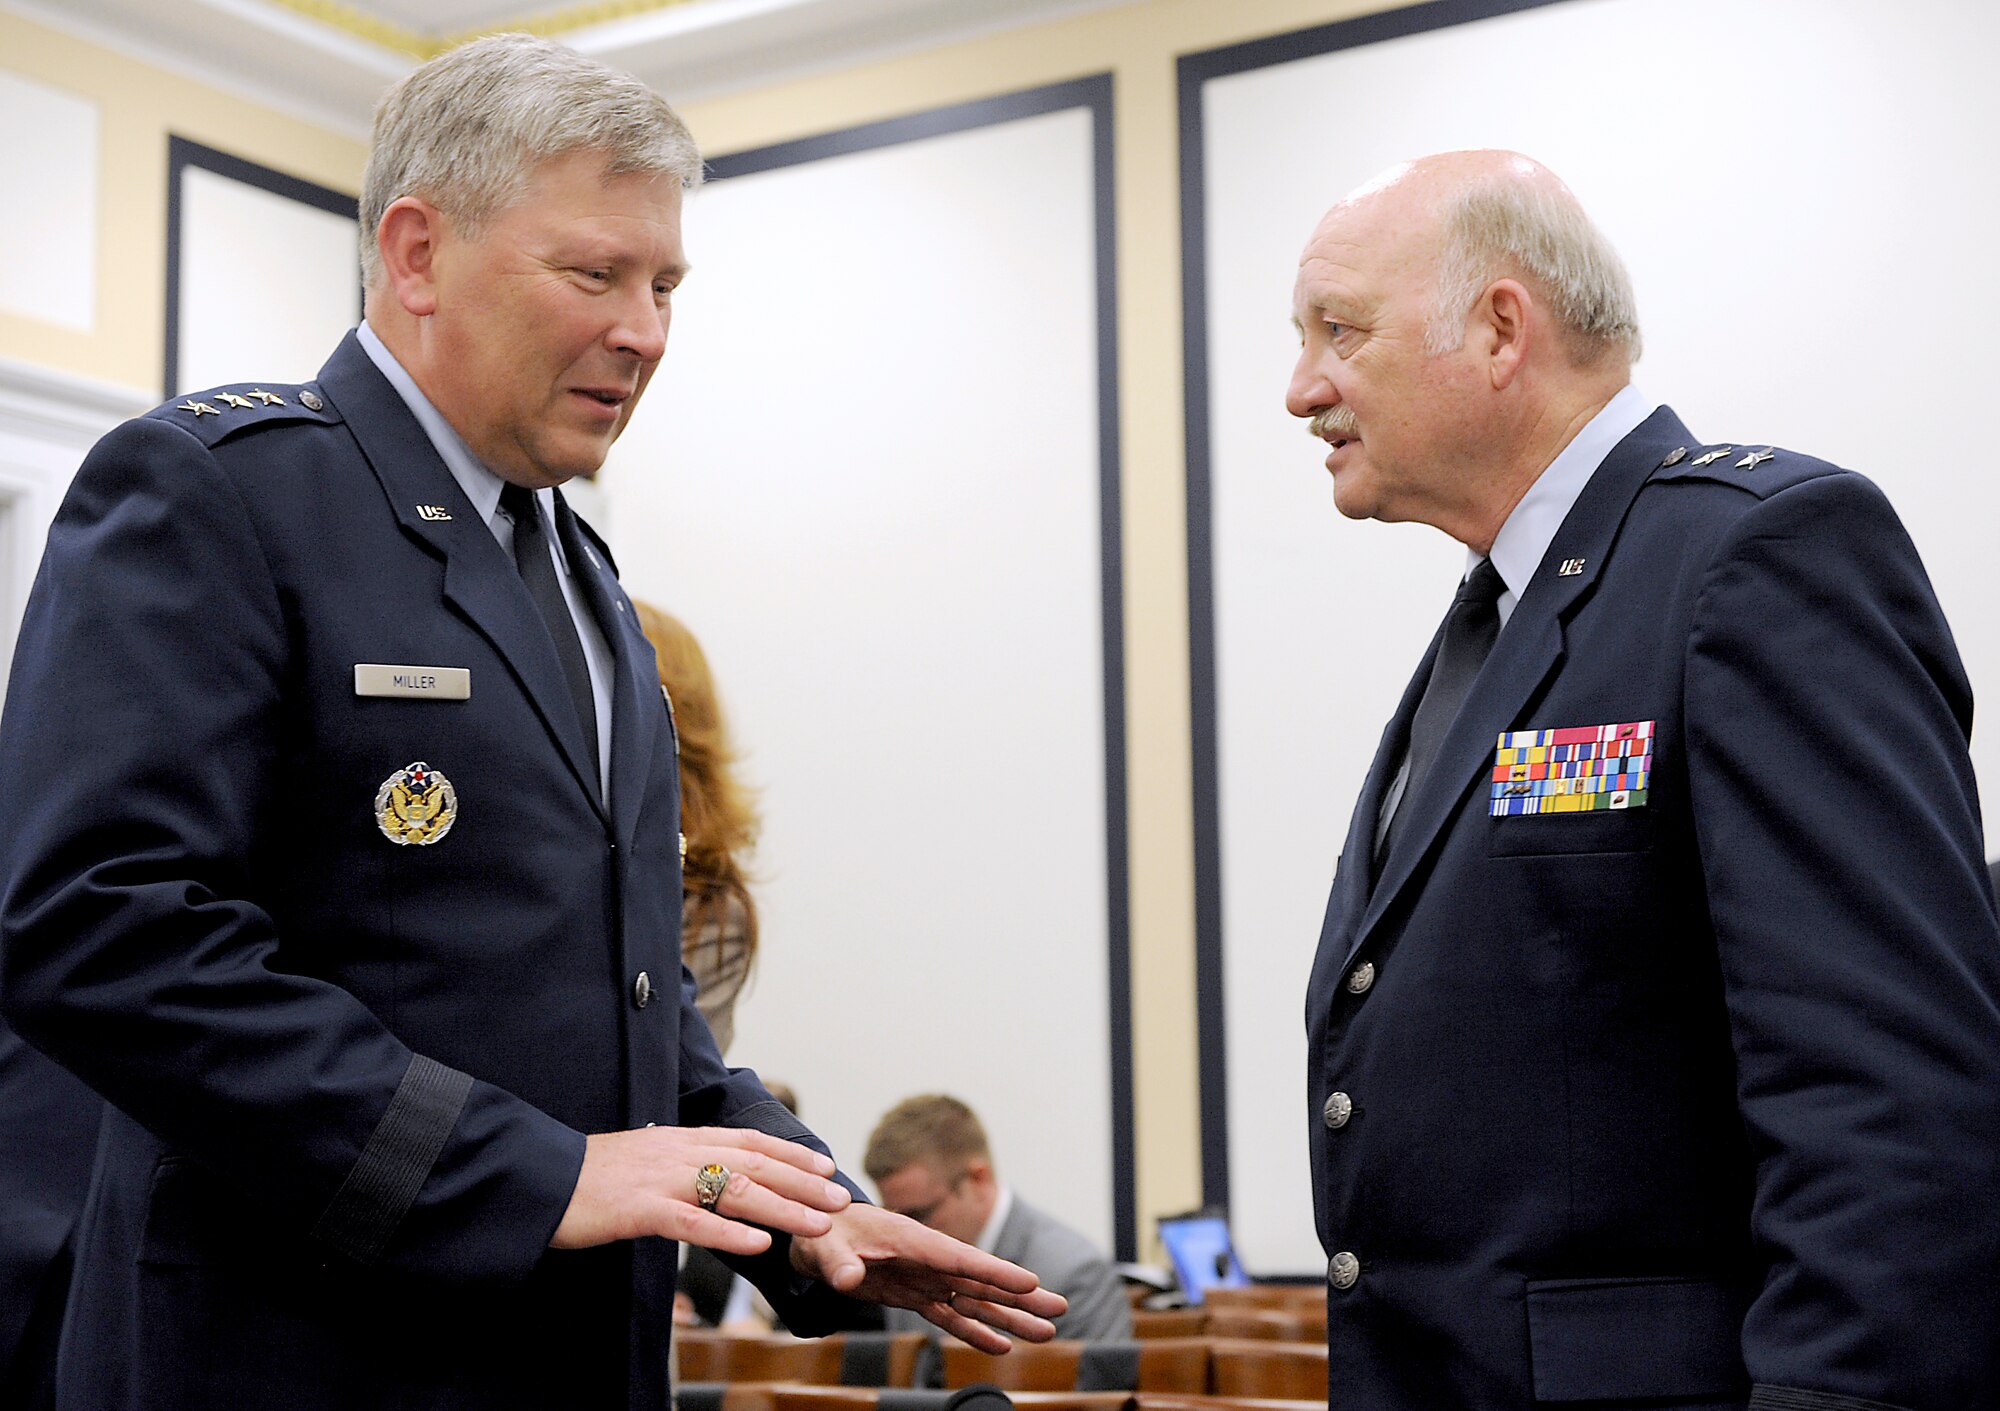 Lt. Gen. Christopher Miller, Deputy Chief of Staff for Strategic Plans and Programs, Headquarters, U.S. Air Force, speaks with Maj. Gen. Timothy Lowenberg, the Adjutant General, Washington, and commander of all Washington Army and Air National Guard forces, prior to a hearing before the House Armed Services Committee on Air Force aircraft force structure reductions, in Washington, D.C., July 12, 2012,   (U.S. Air Force photo/Senior Airman Christina Brownlow)